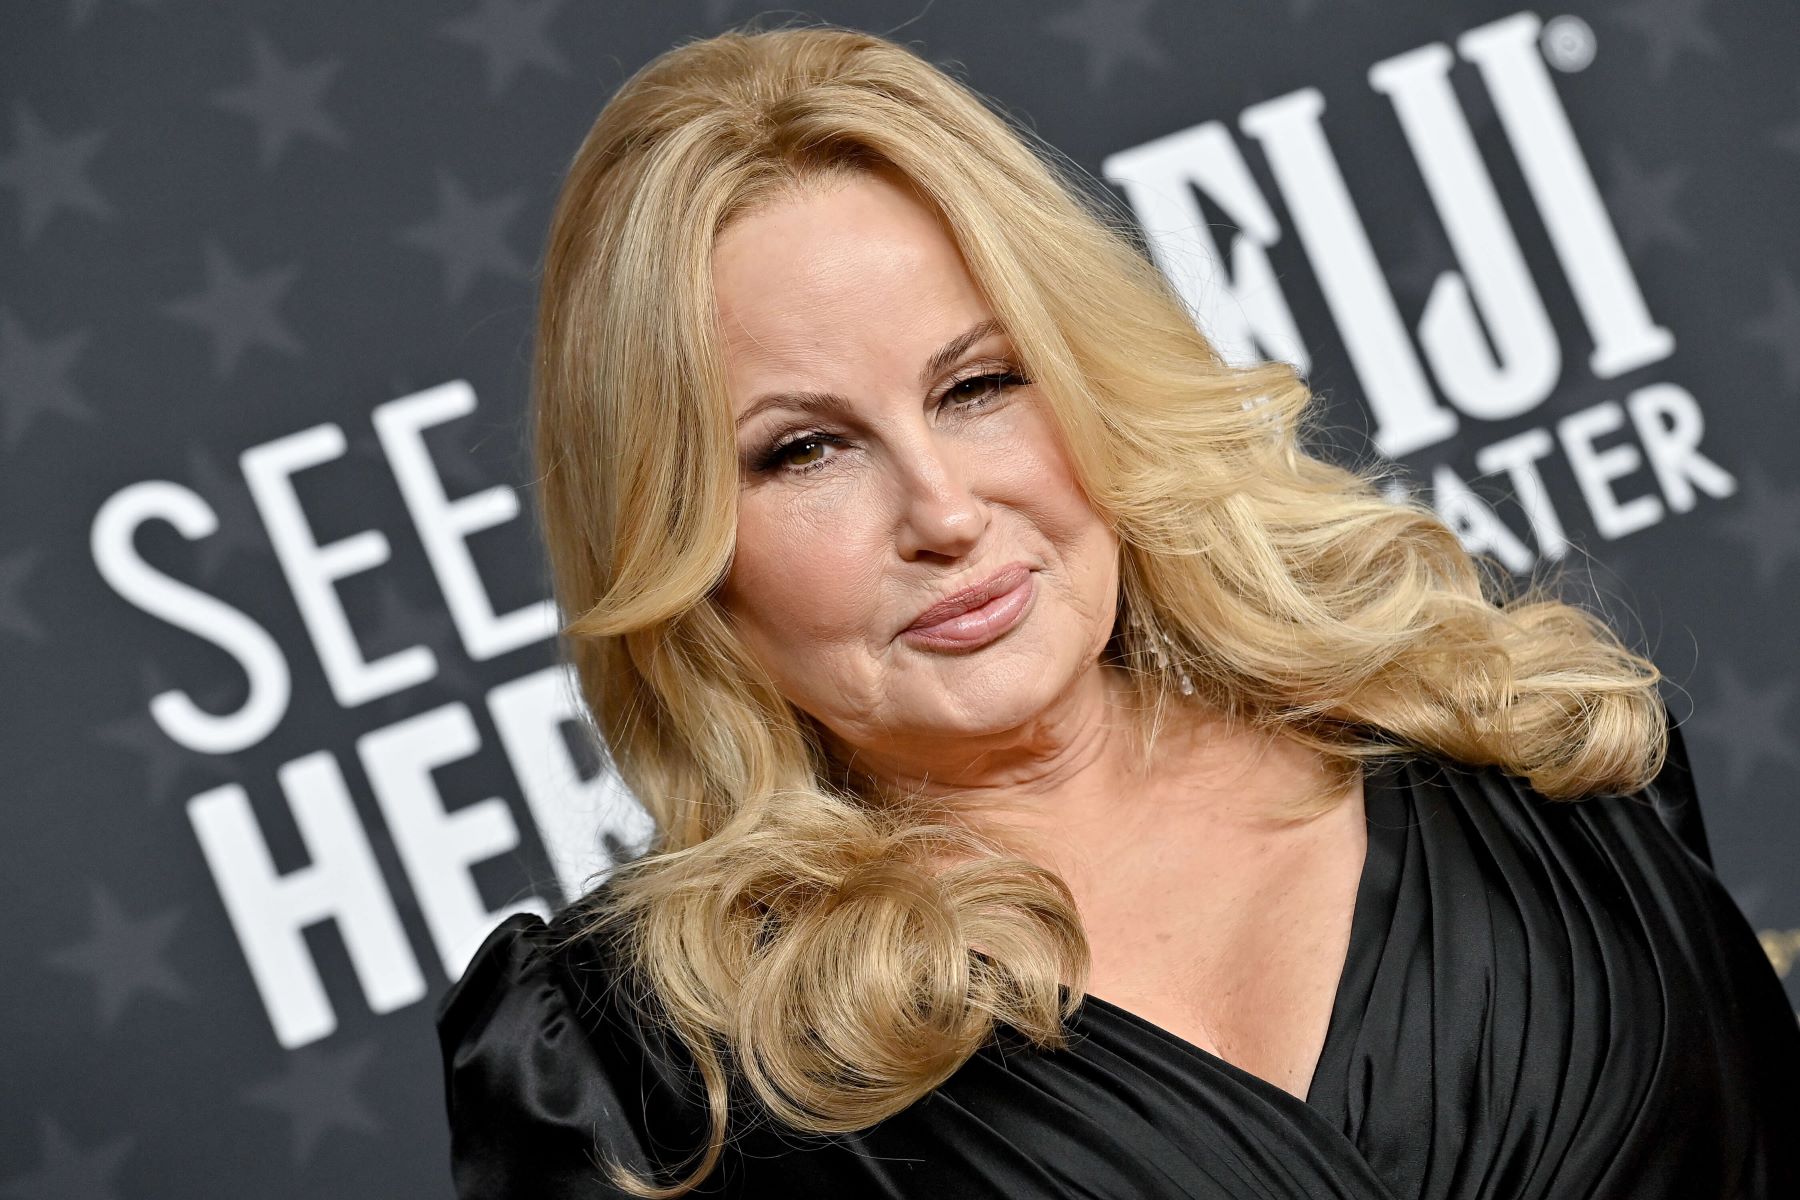 Jennifer Coolidge, who the 'How I Met Your Father' cast wants to see on their show, wears a black long-sleeved dress.